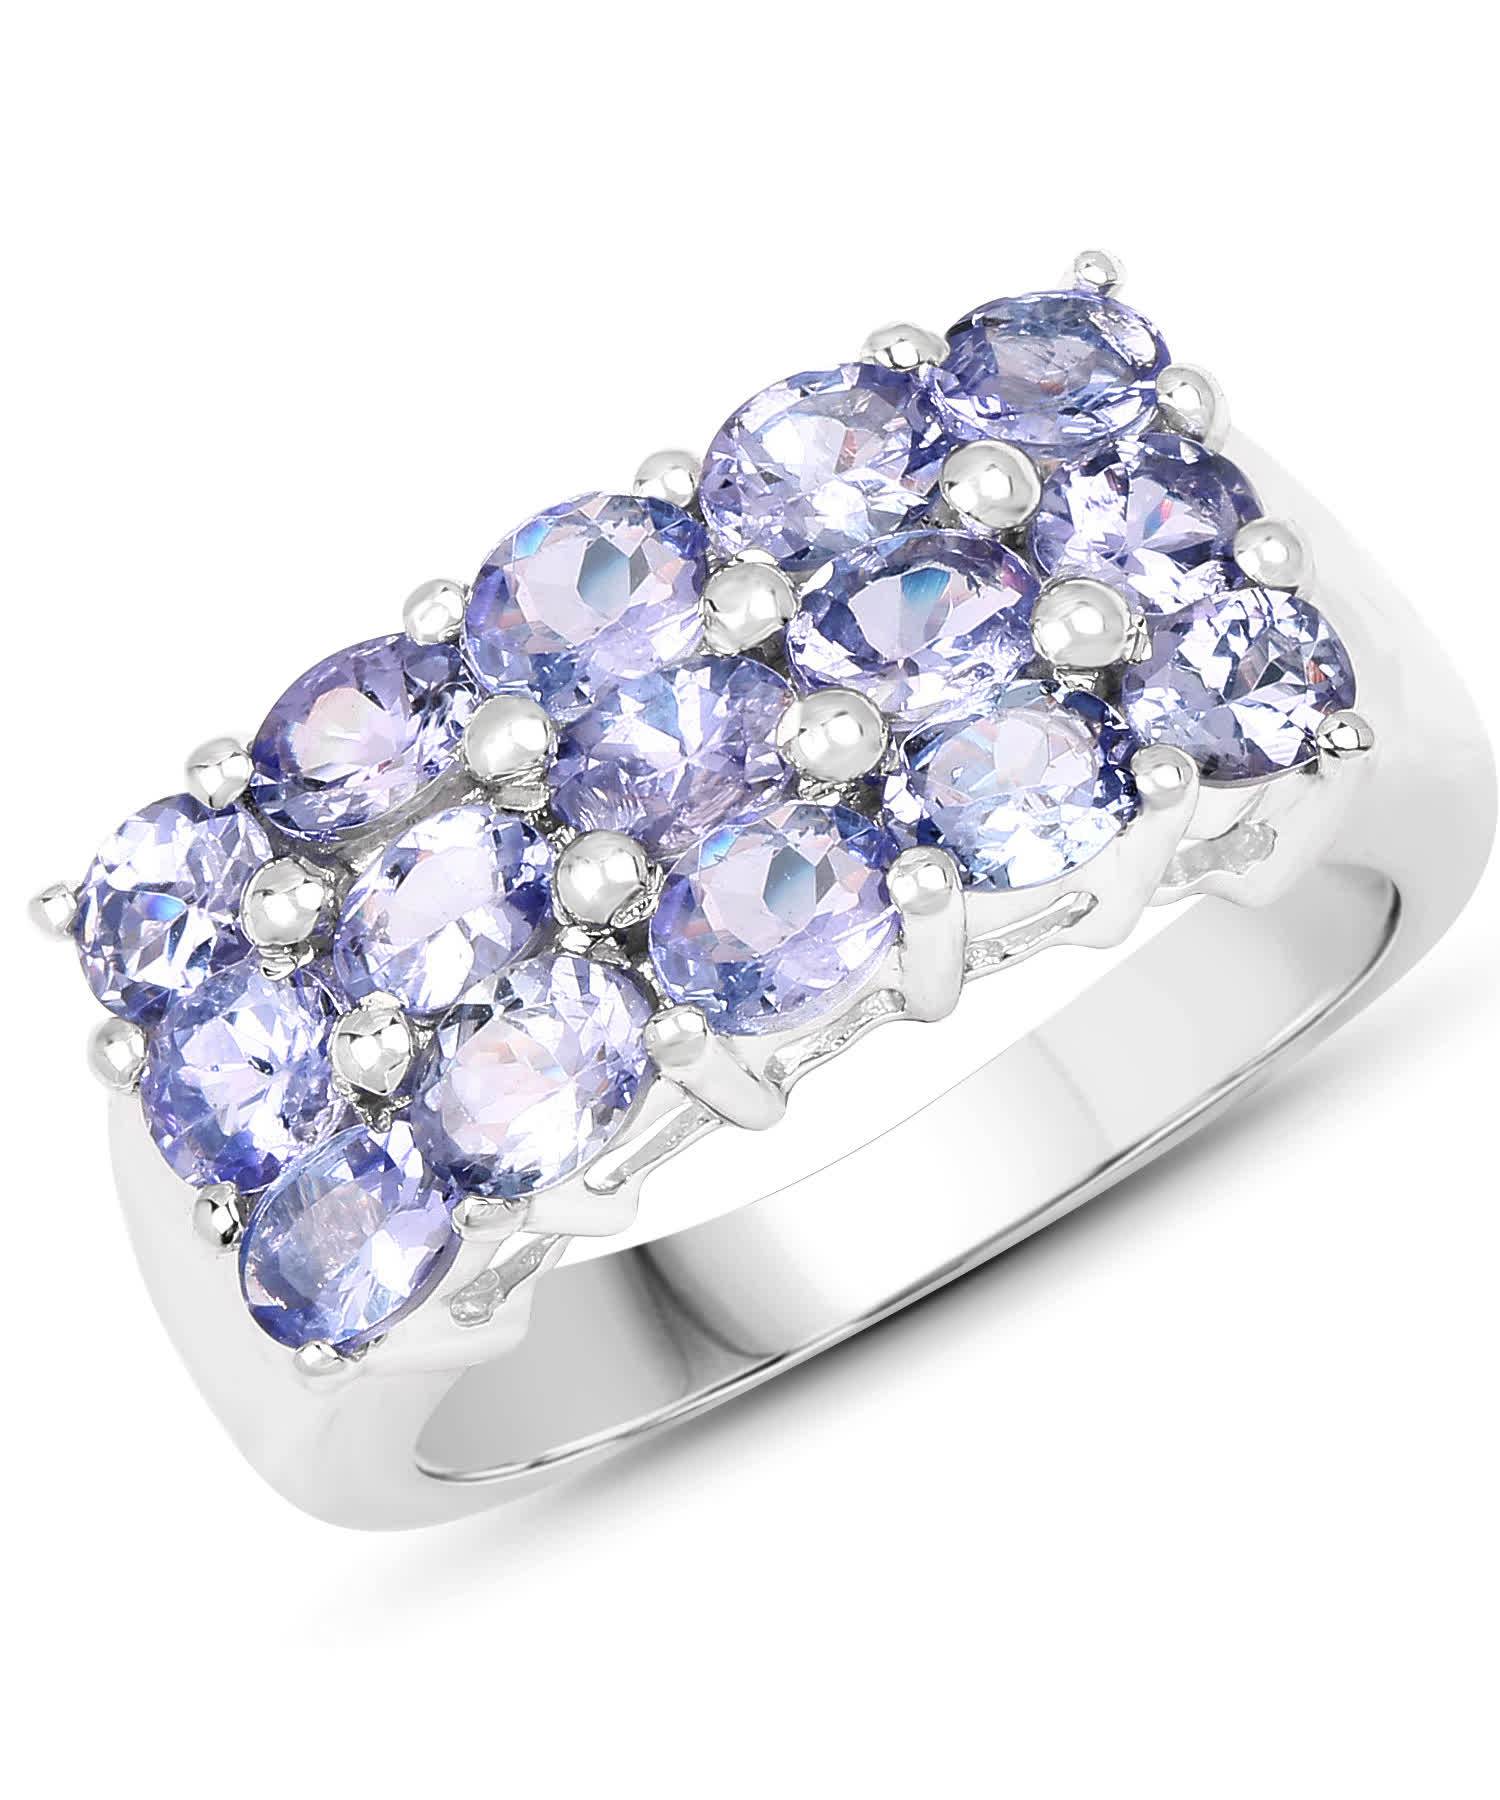 2.55ctw Natural Tanzanite Rhodium Plated 925 Sterling Silver Ring View 1